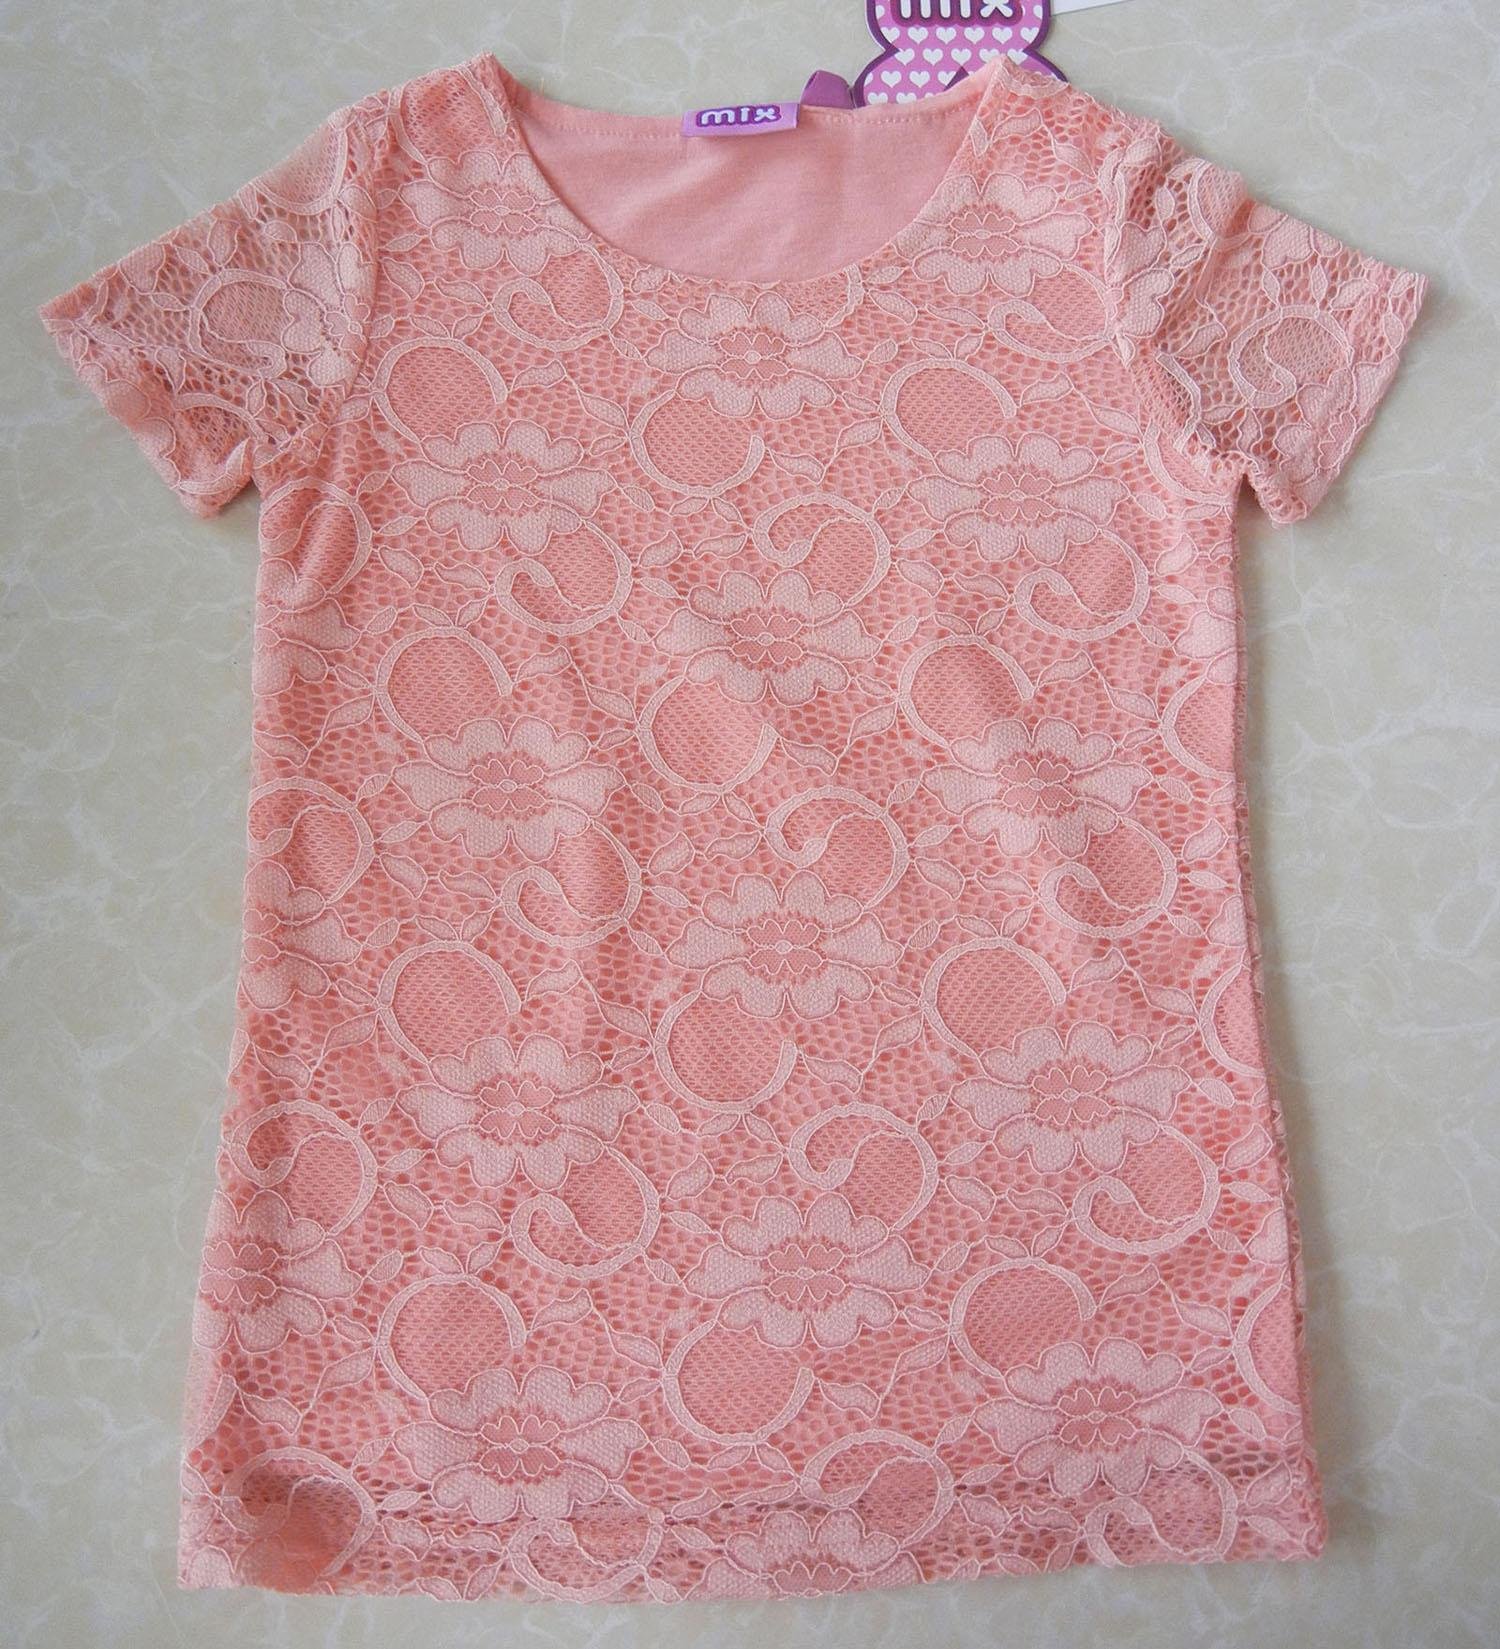 GIRL'S POLYESTER LACE JERSEY TOP